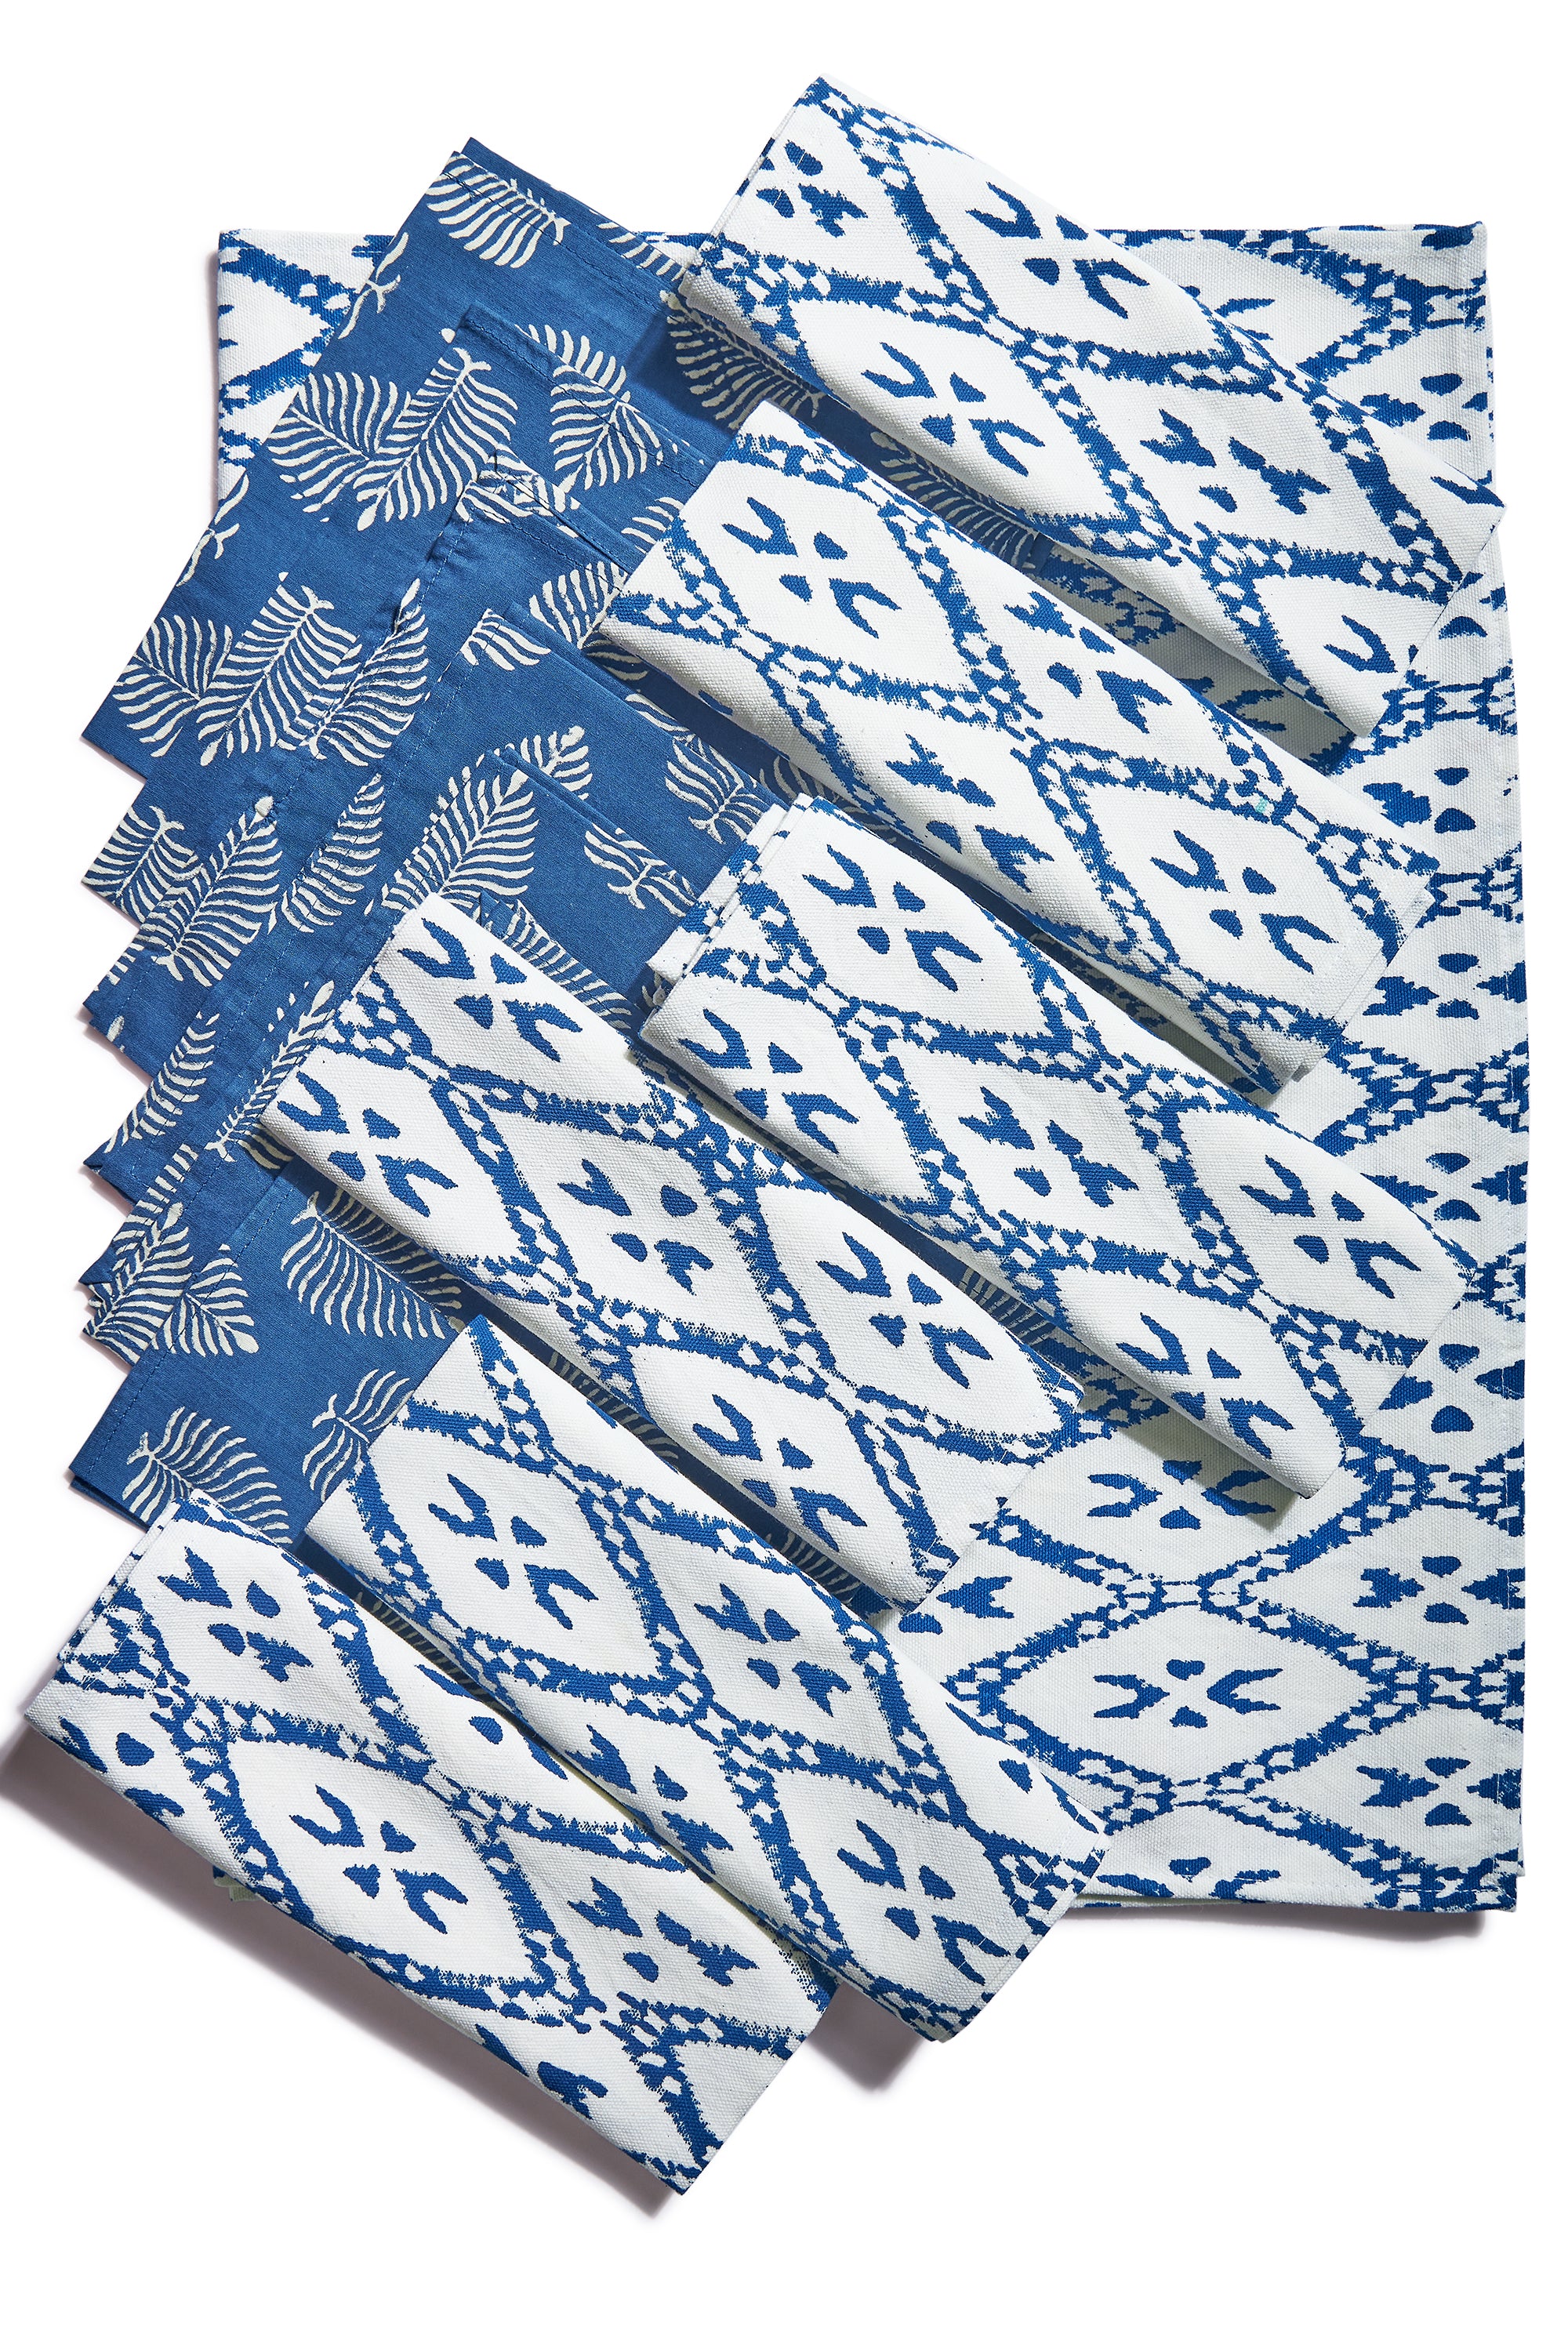 table mats set of 6 with runner and napkins